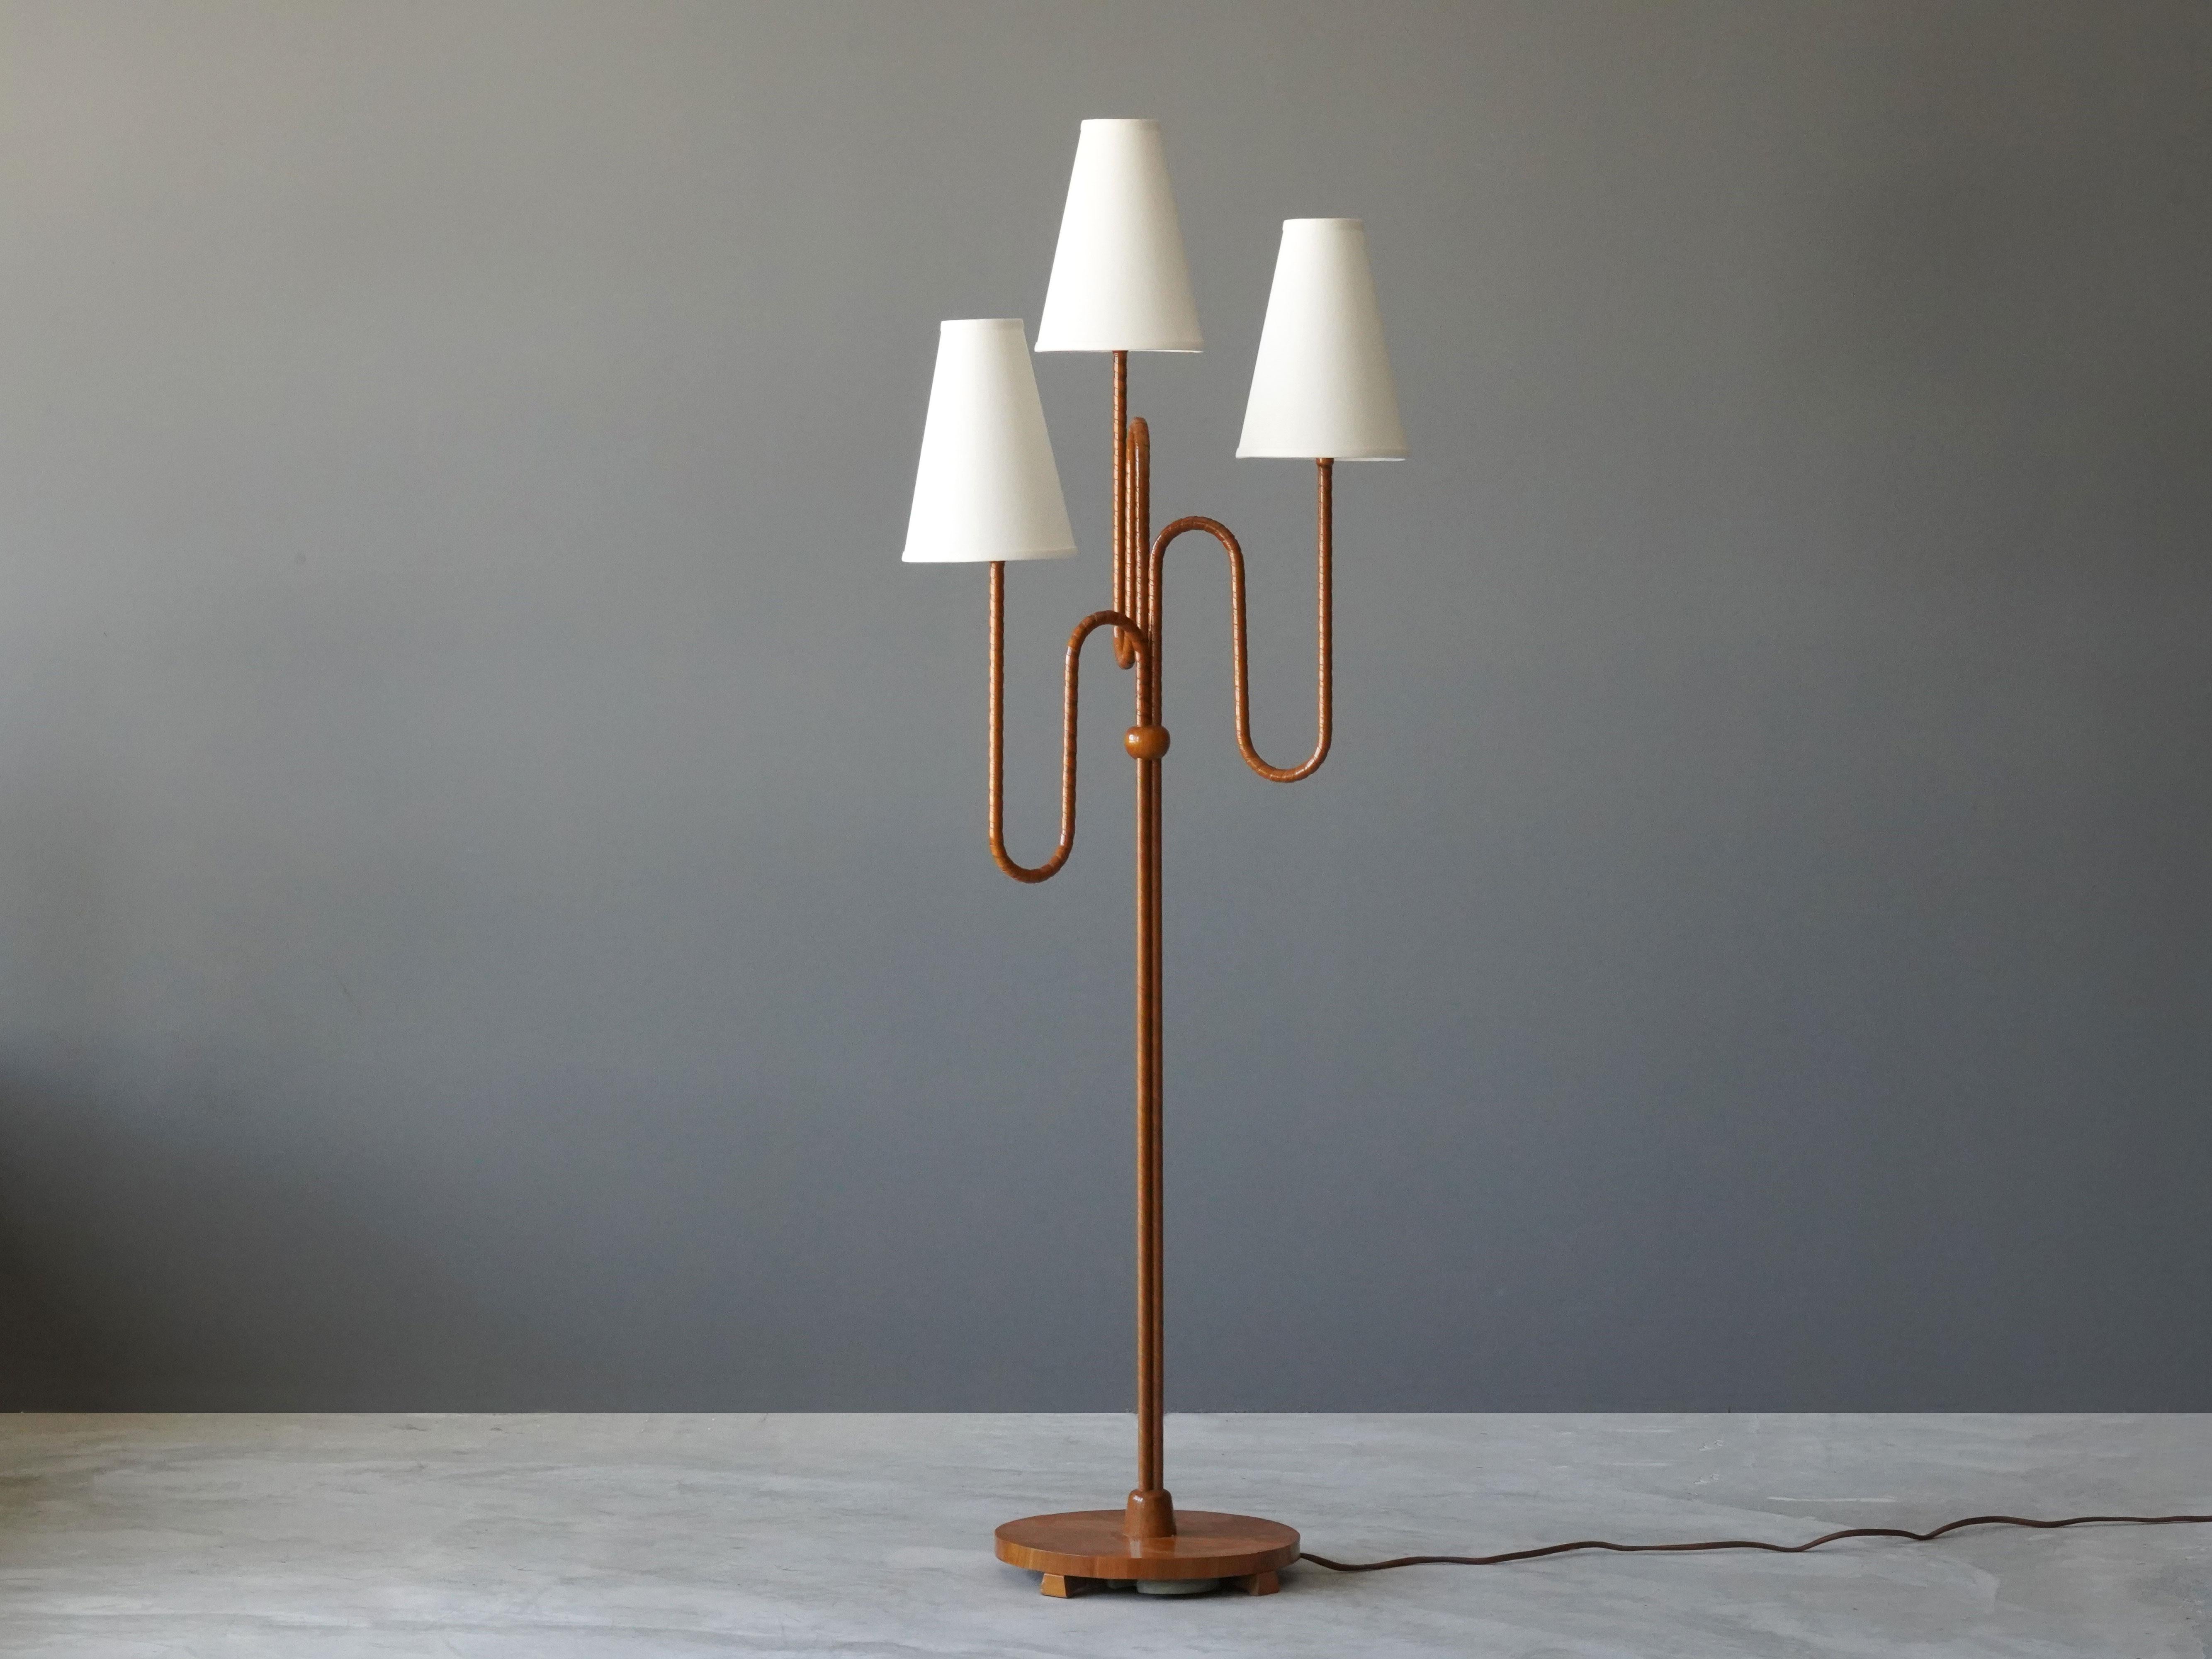 An organic three-armed floor lamp. Designed by an unknown Swedish modernist designer, 1930s. Possibly manufactured by Böhlmarks. Produced in rattan, wood, linen, and brass. 

Other designers working in the organic style include Jean Royere, Gio